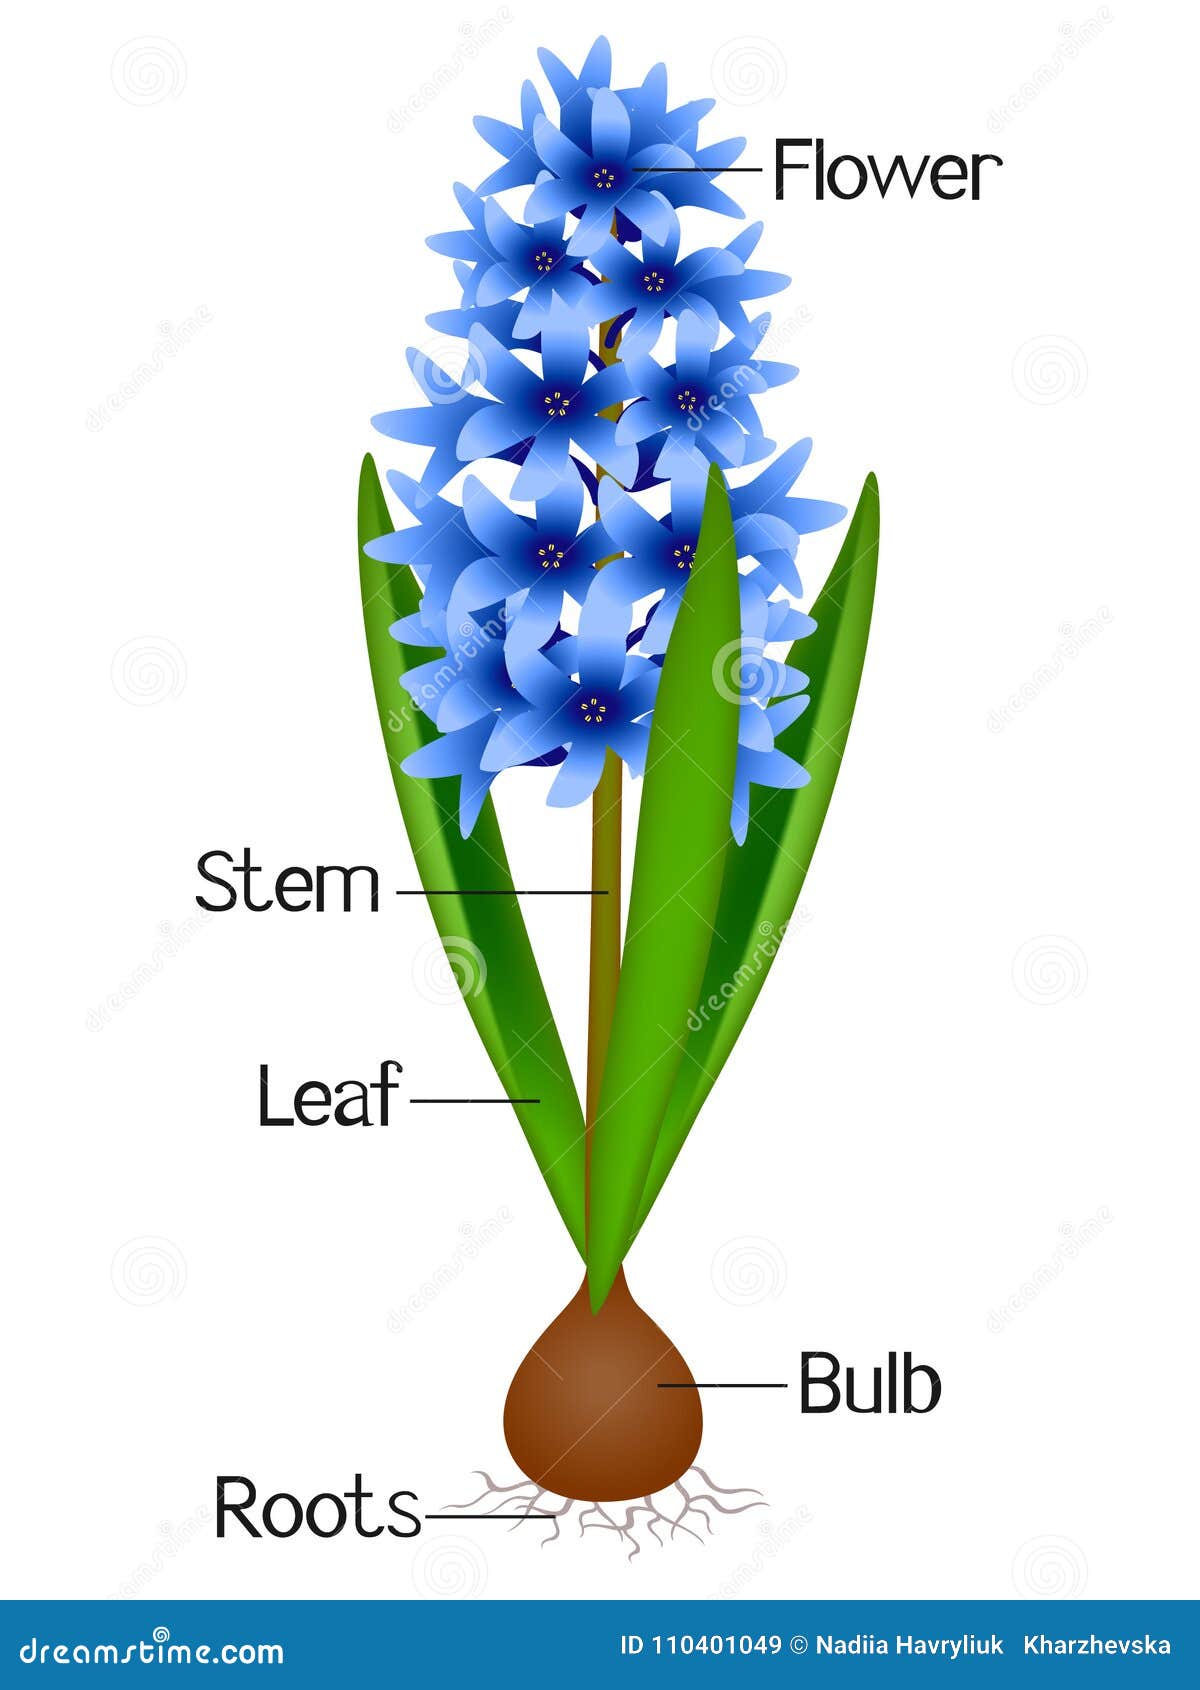 An Illustration Showing Parts of a Hyacinth Plant. Stock Vector ...